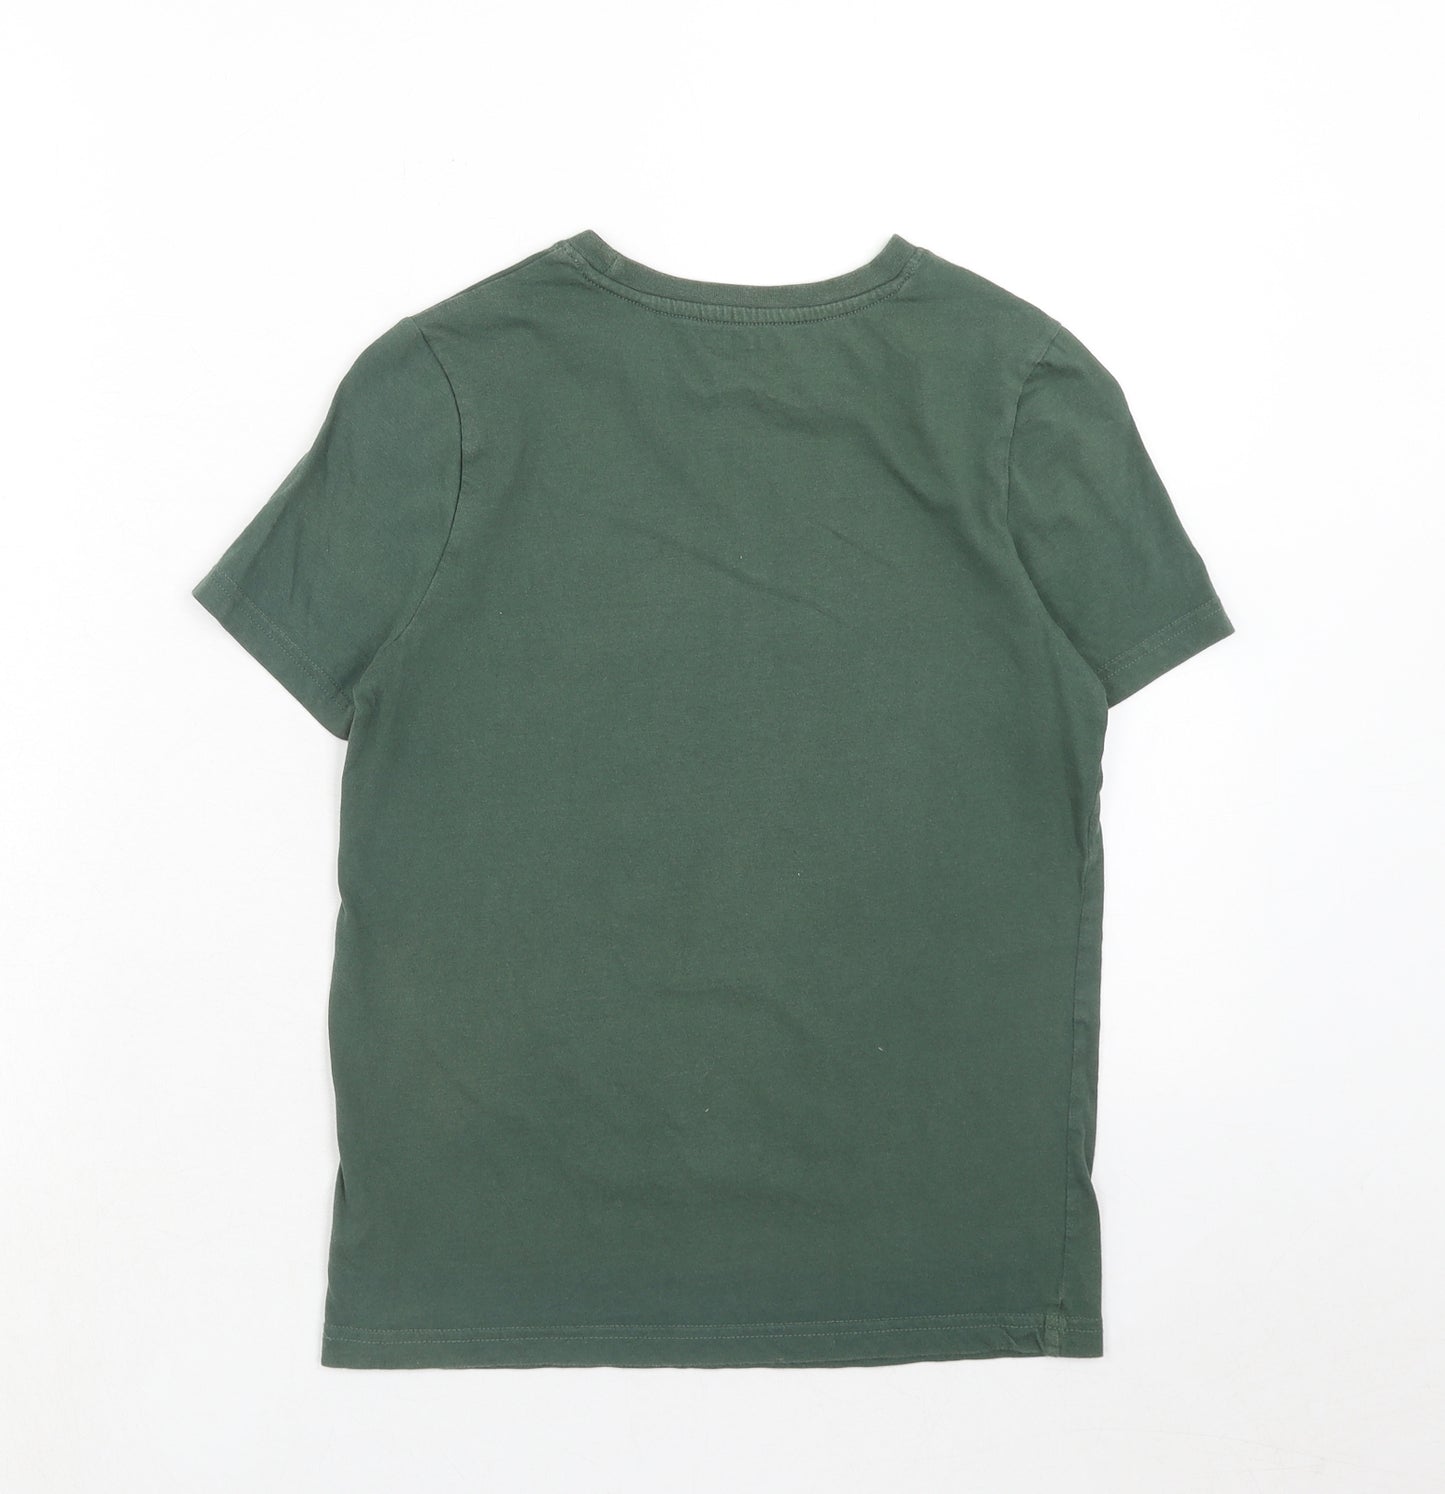 F&F Boys Green Cotton Basic T-Shirt Size 9-10 Years Round Neck Pullover - Urban Skate